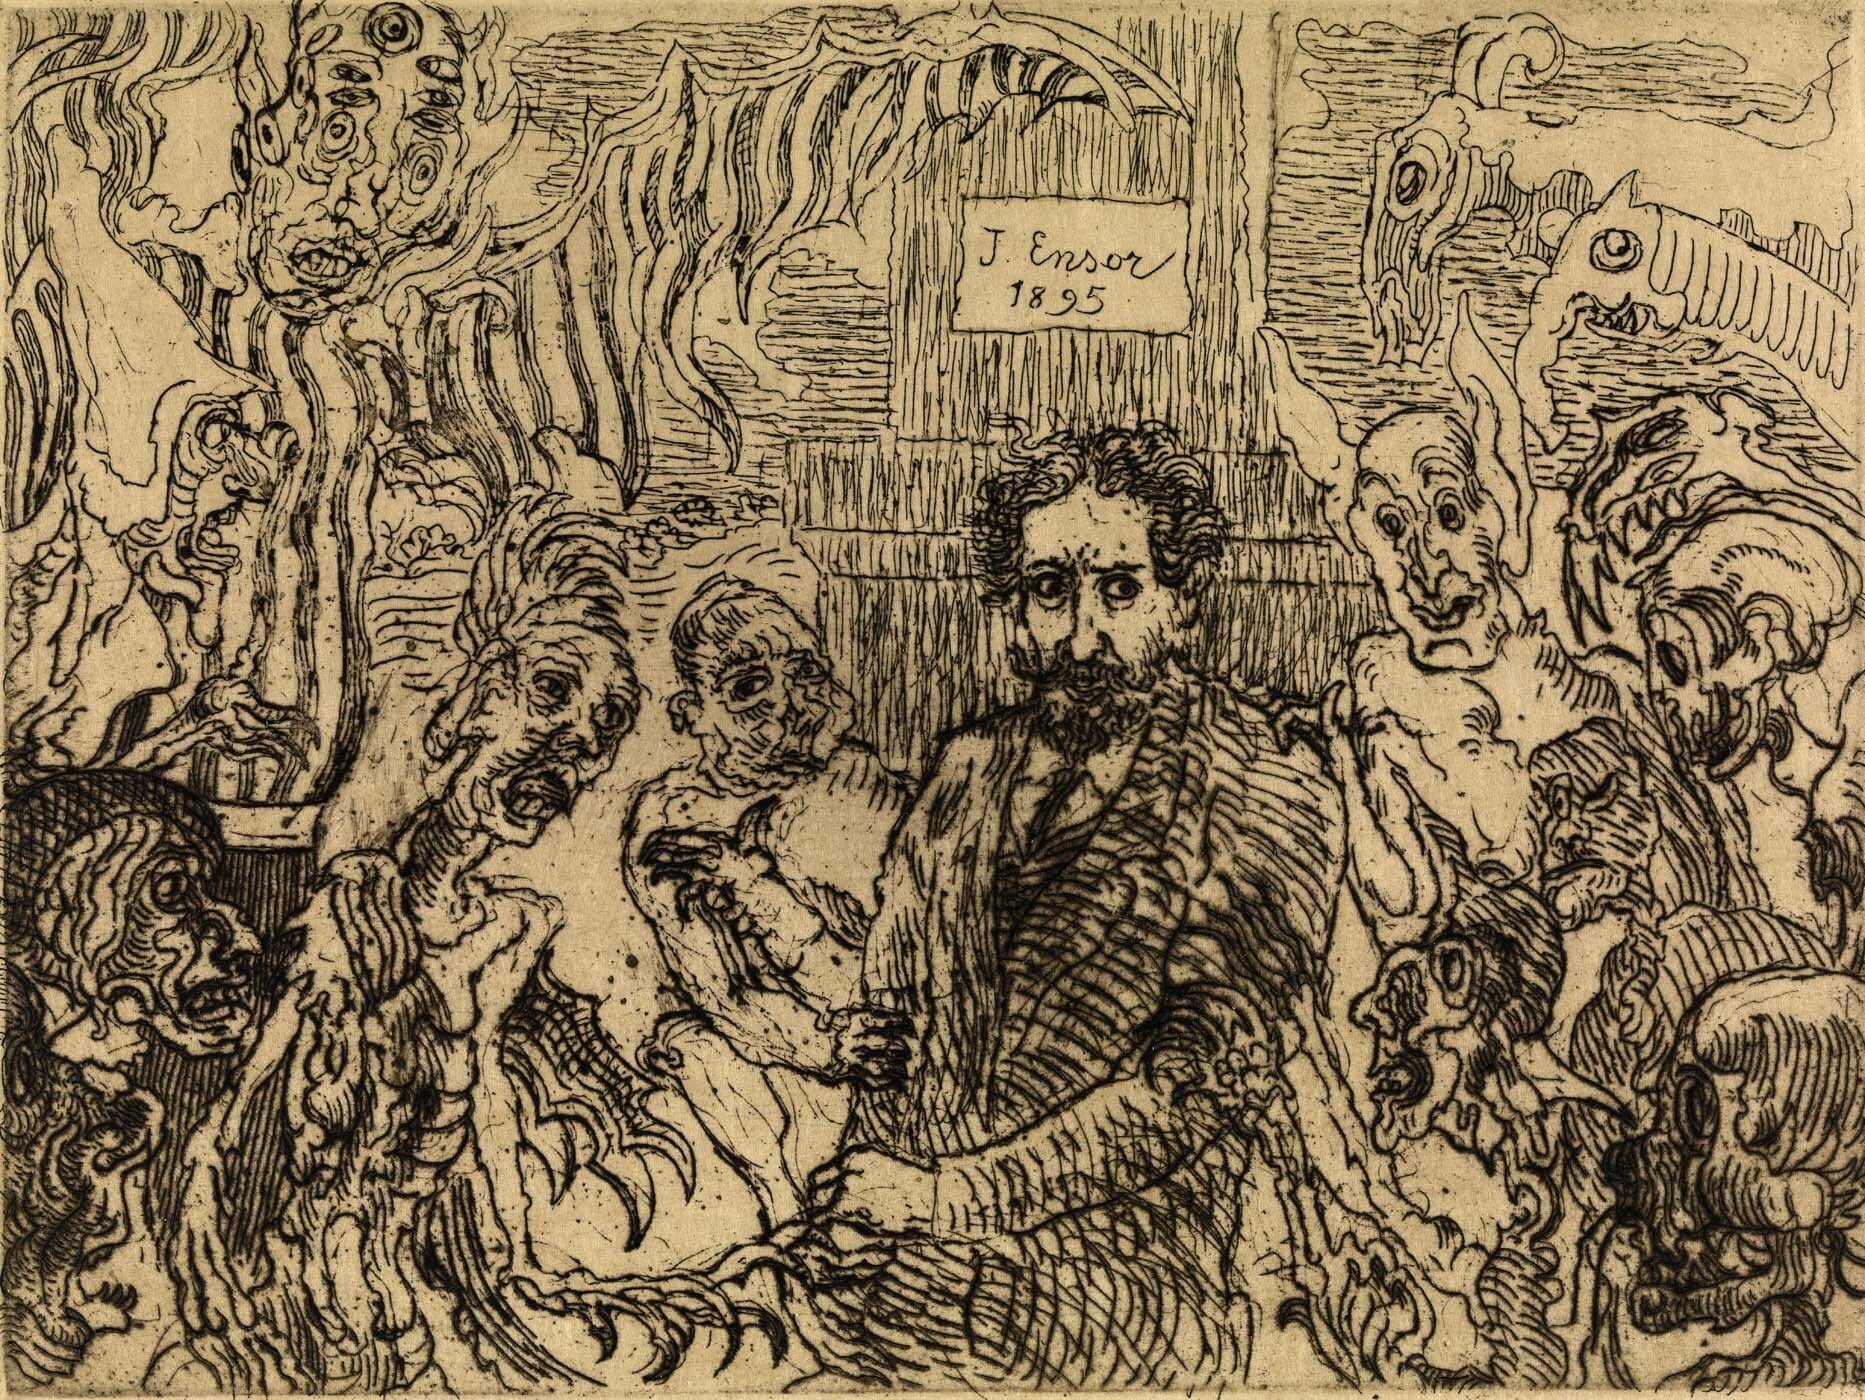 James Ensor Demons Taunting Me 1895 etching 11 8 x 15 8 cm Museum of Fine Arts Ghent